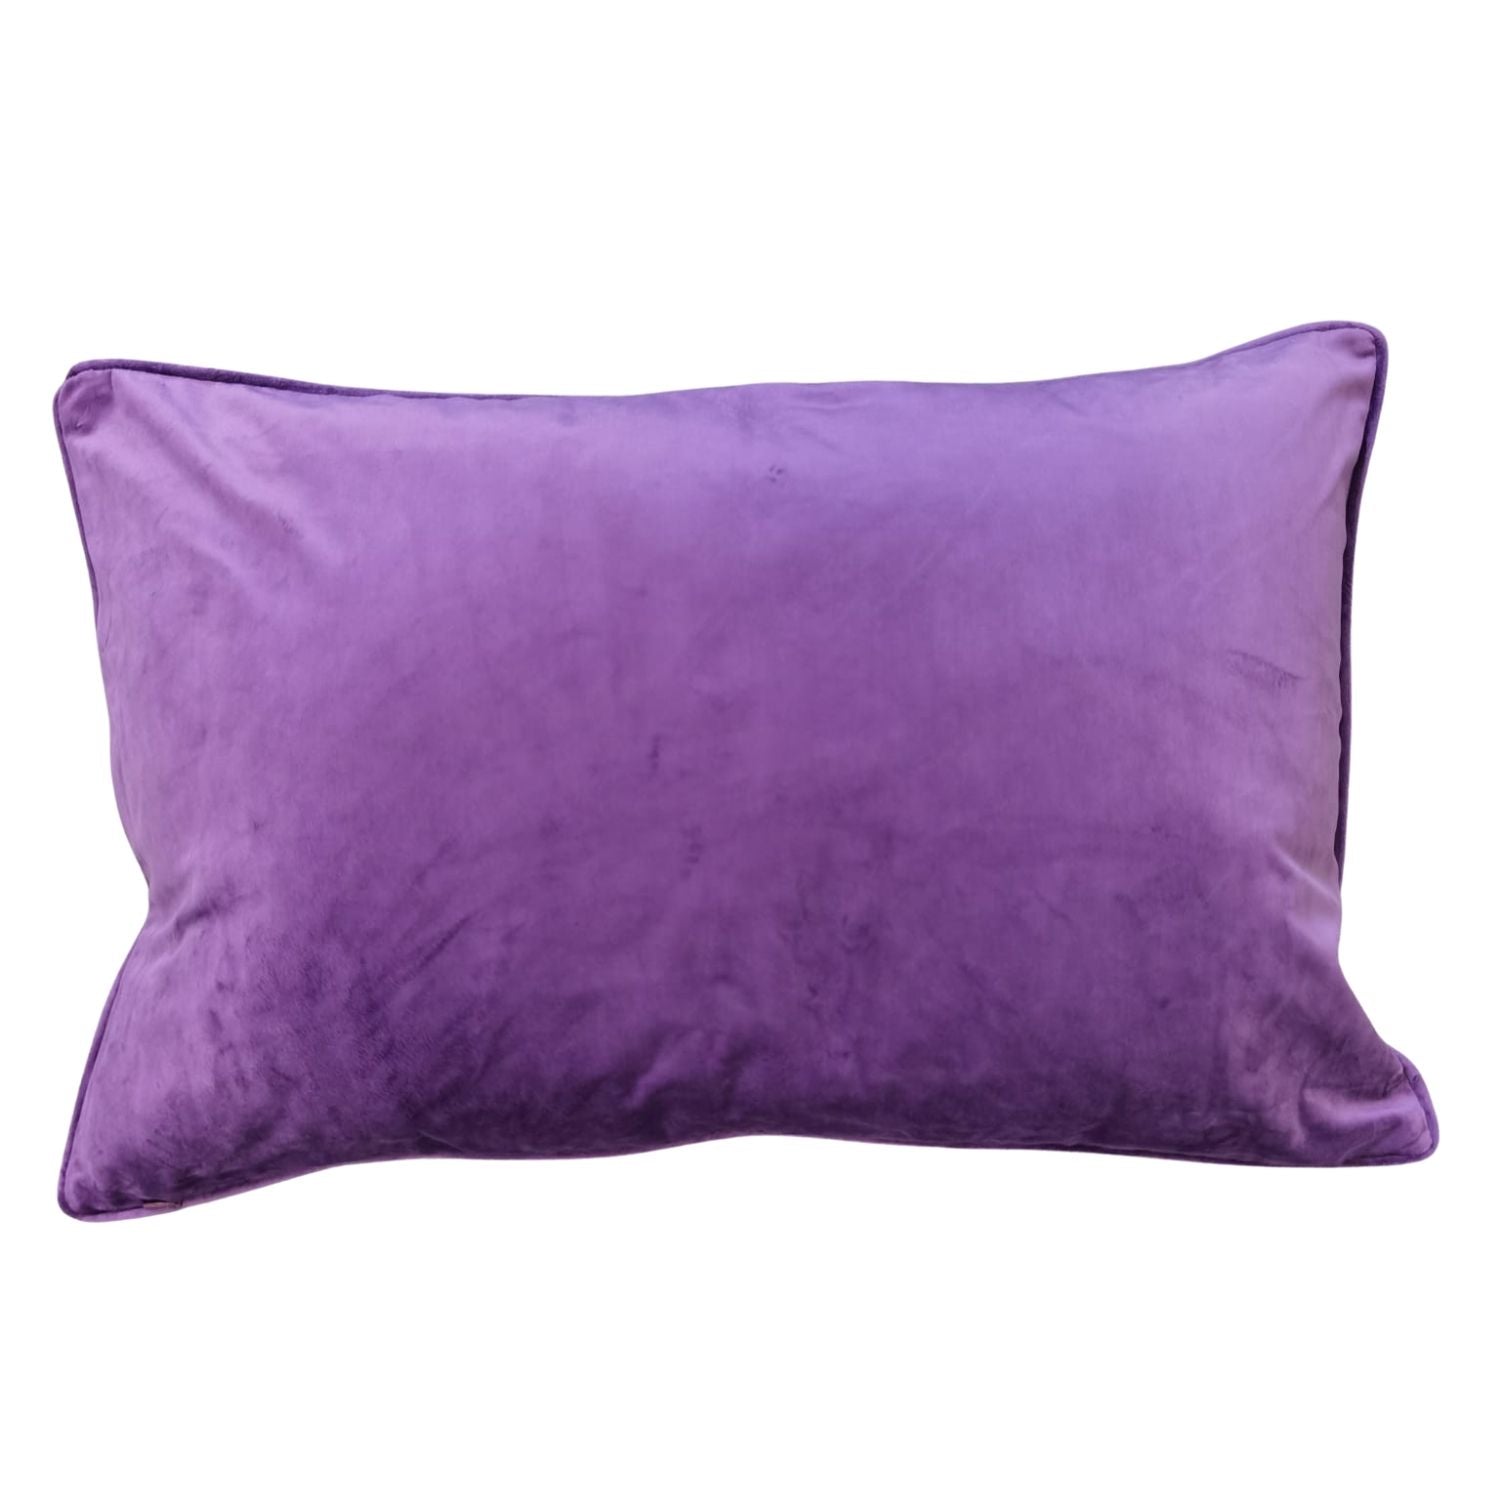 The Home Living Room Printed Piped Cushion - Purple 2 Shaws Department Stores